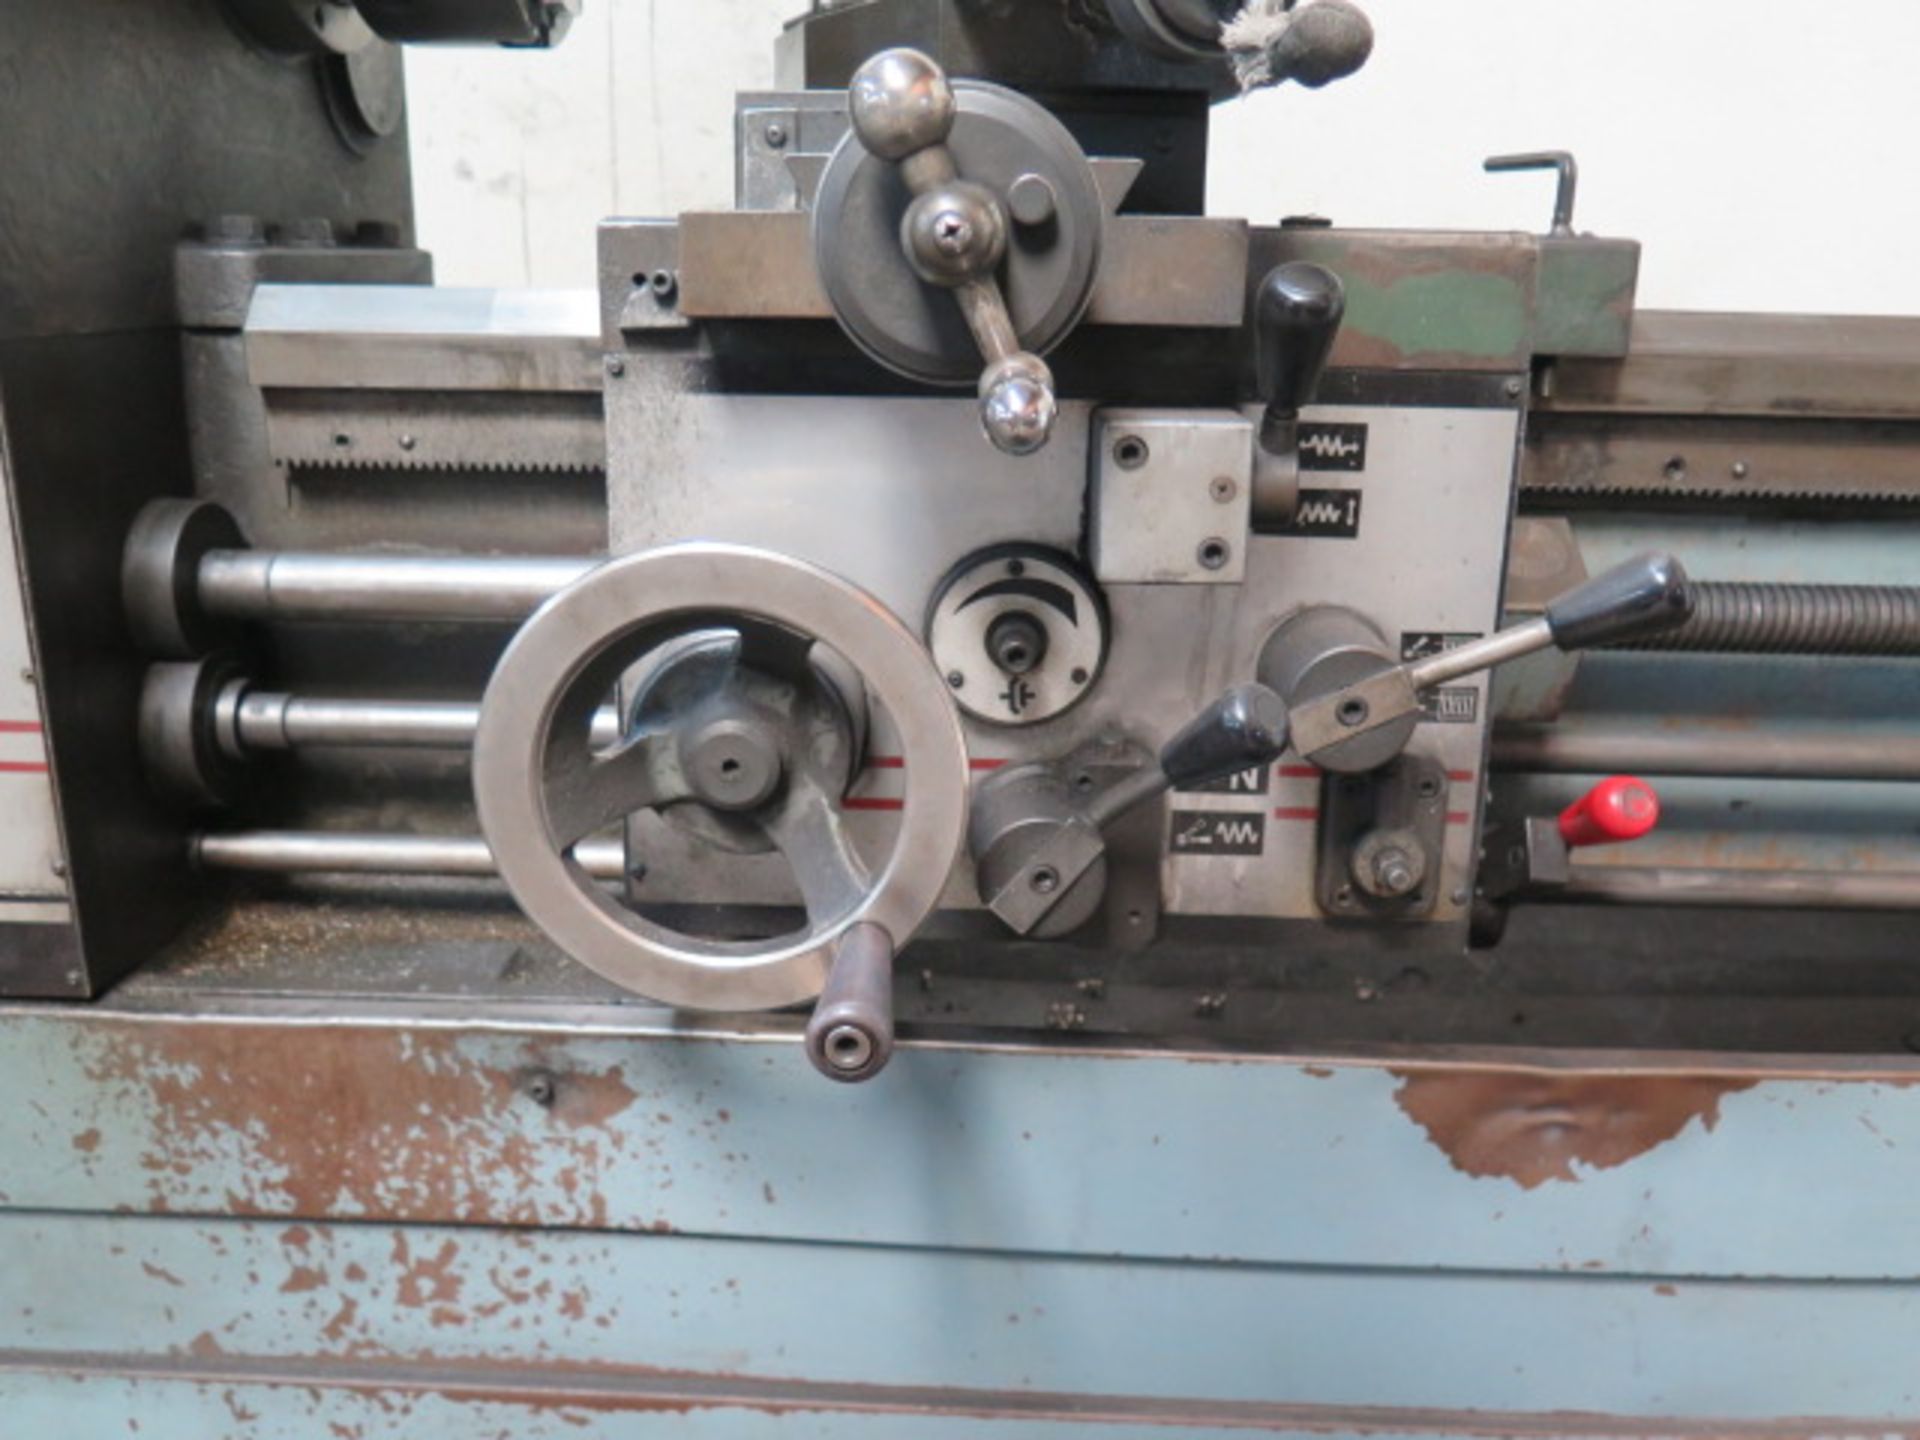 Japan Machinery Corp NL-20X60 20” x 60” Gap Bed Lathe w/Inch/mm Threading, Tailstock, SOLD AS IS - Image 11 of 20